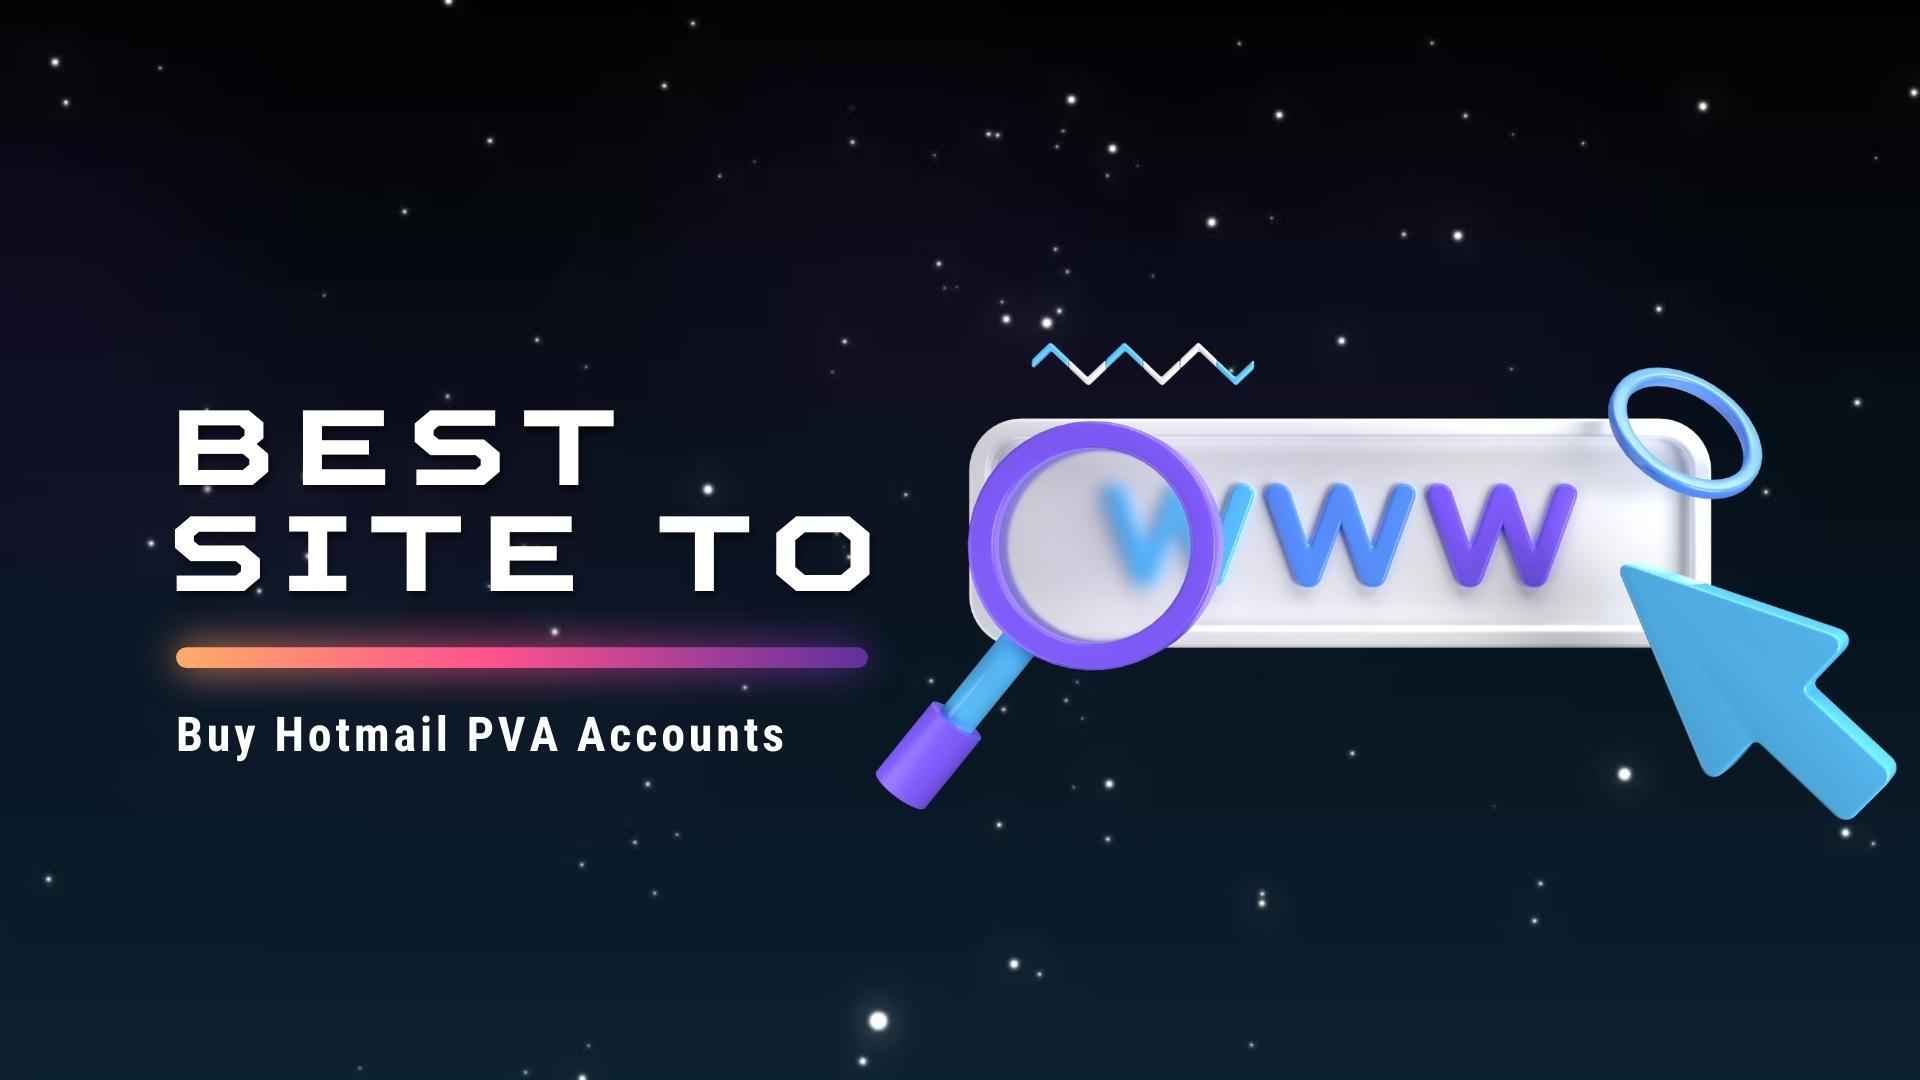 Best Site to Buy Hotmail PVA Accounts